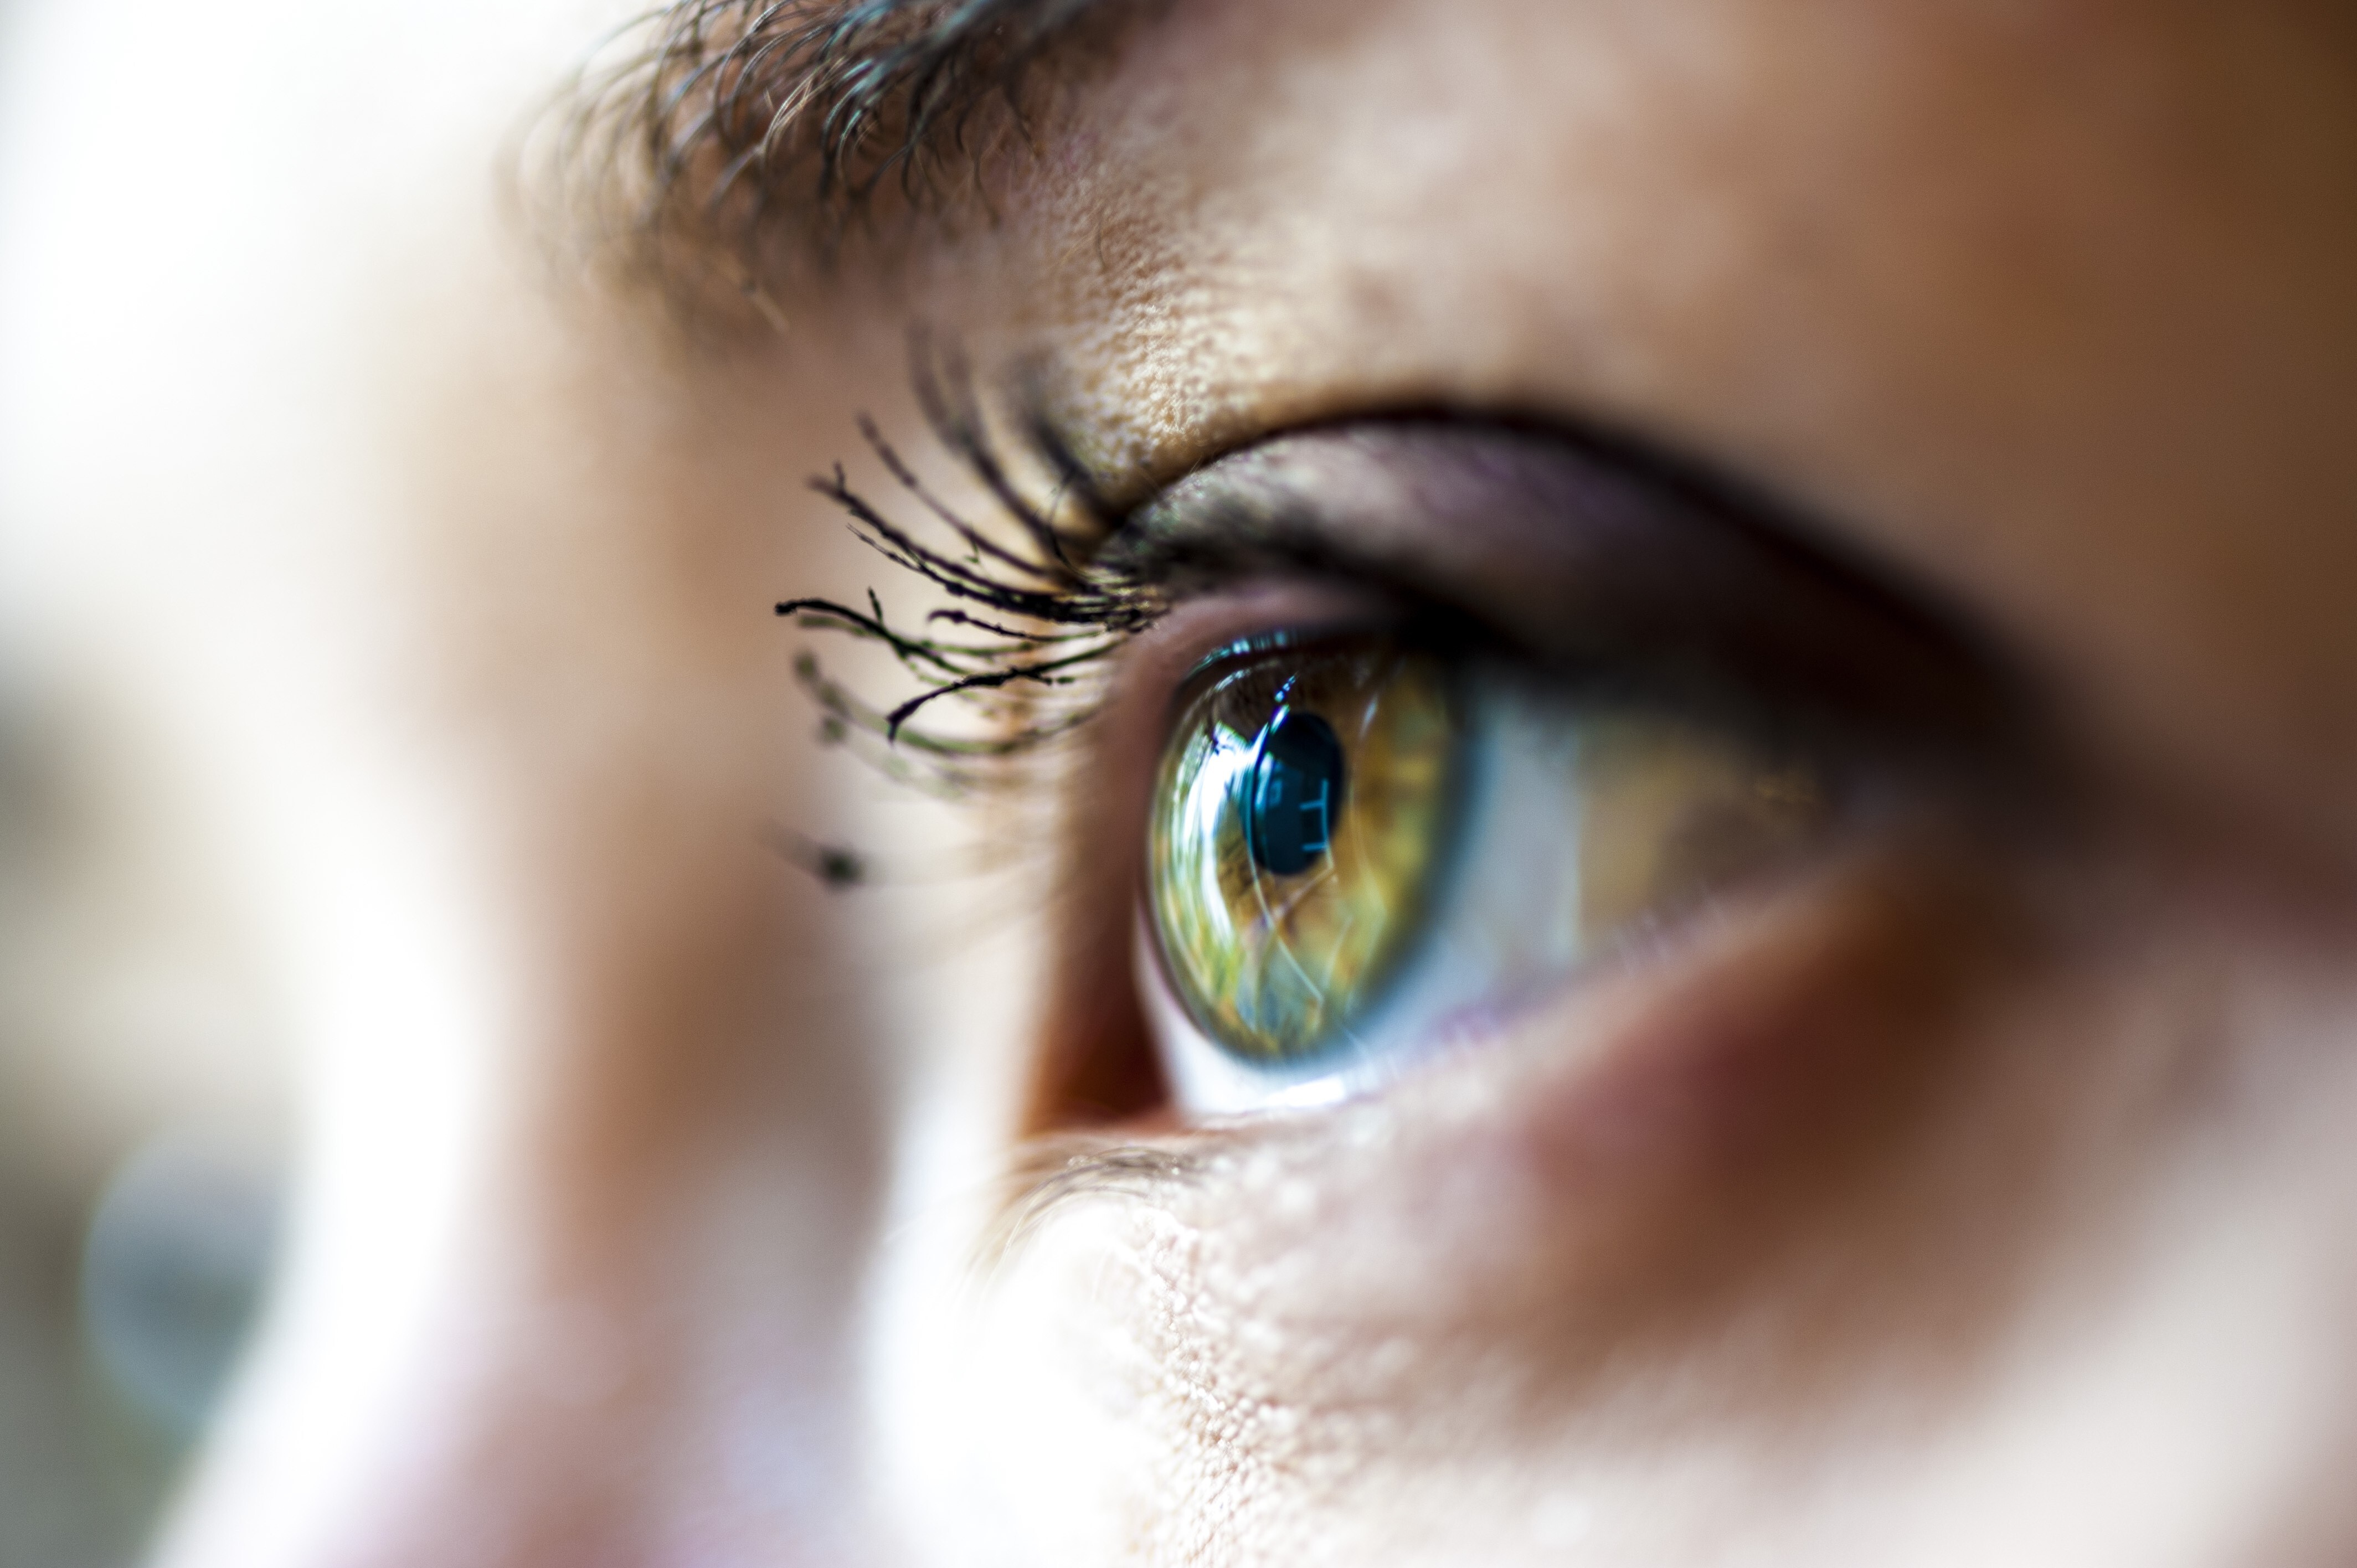 Eye movement desensitisation and reprocessing (EMDR) is a form of therapy used for PTSD sufferers which links eye movements to how the brain process memories. Photo: Shutterstock